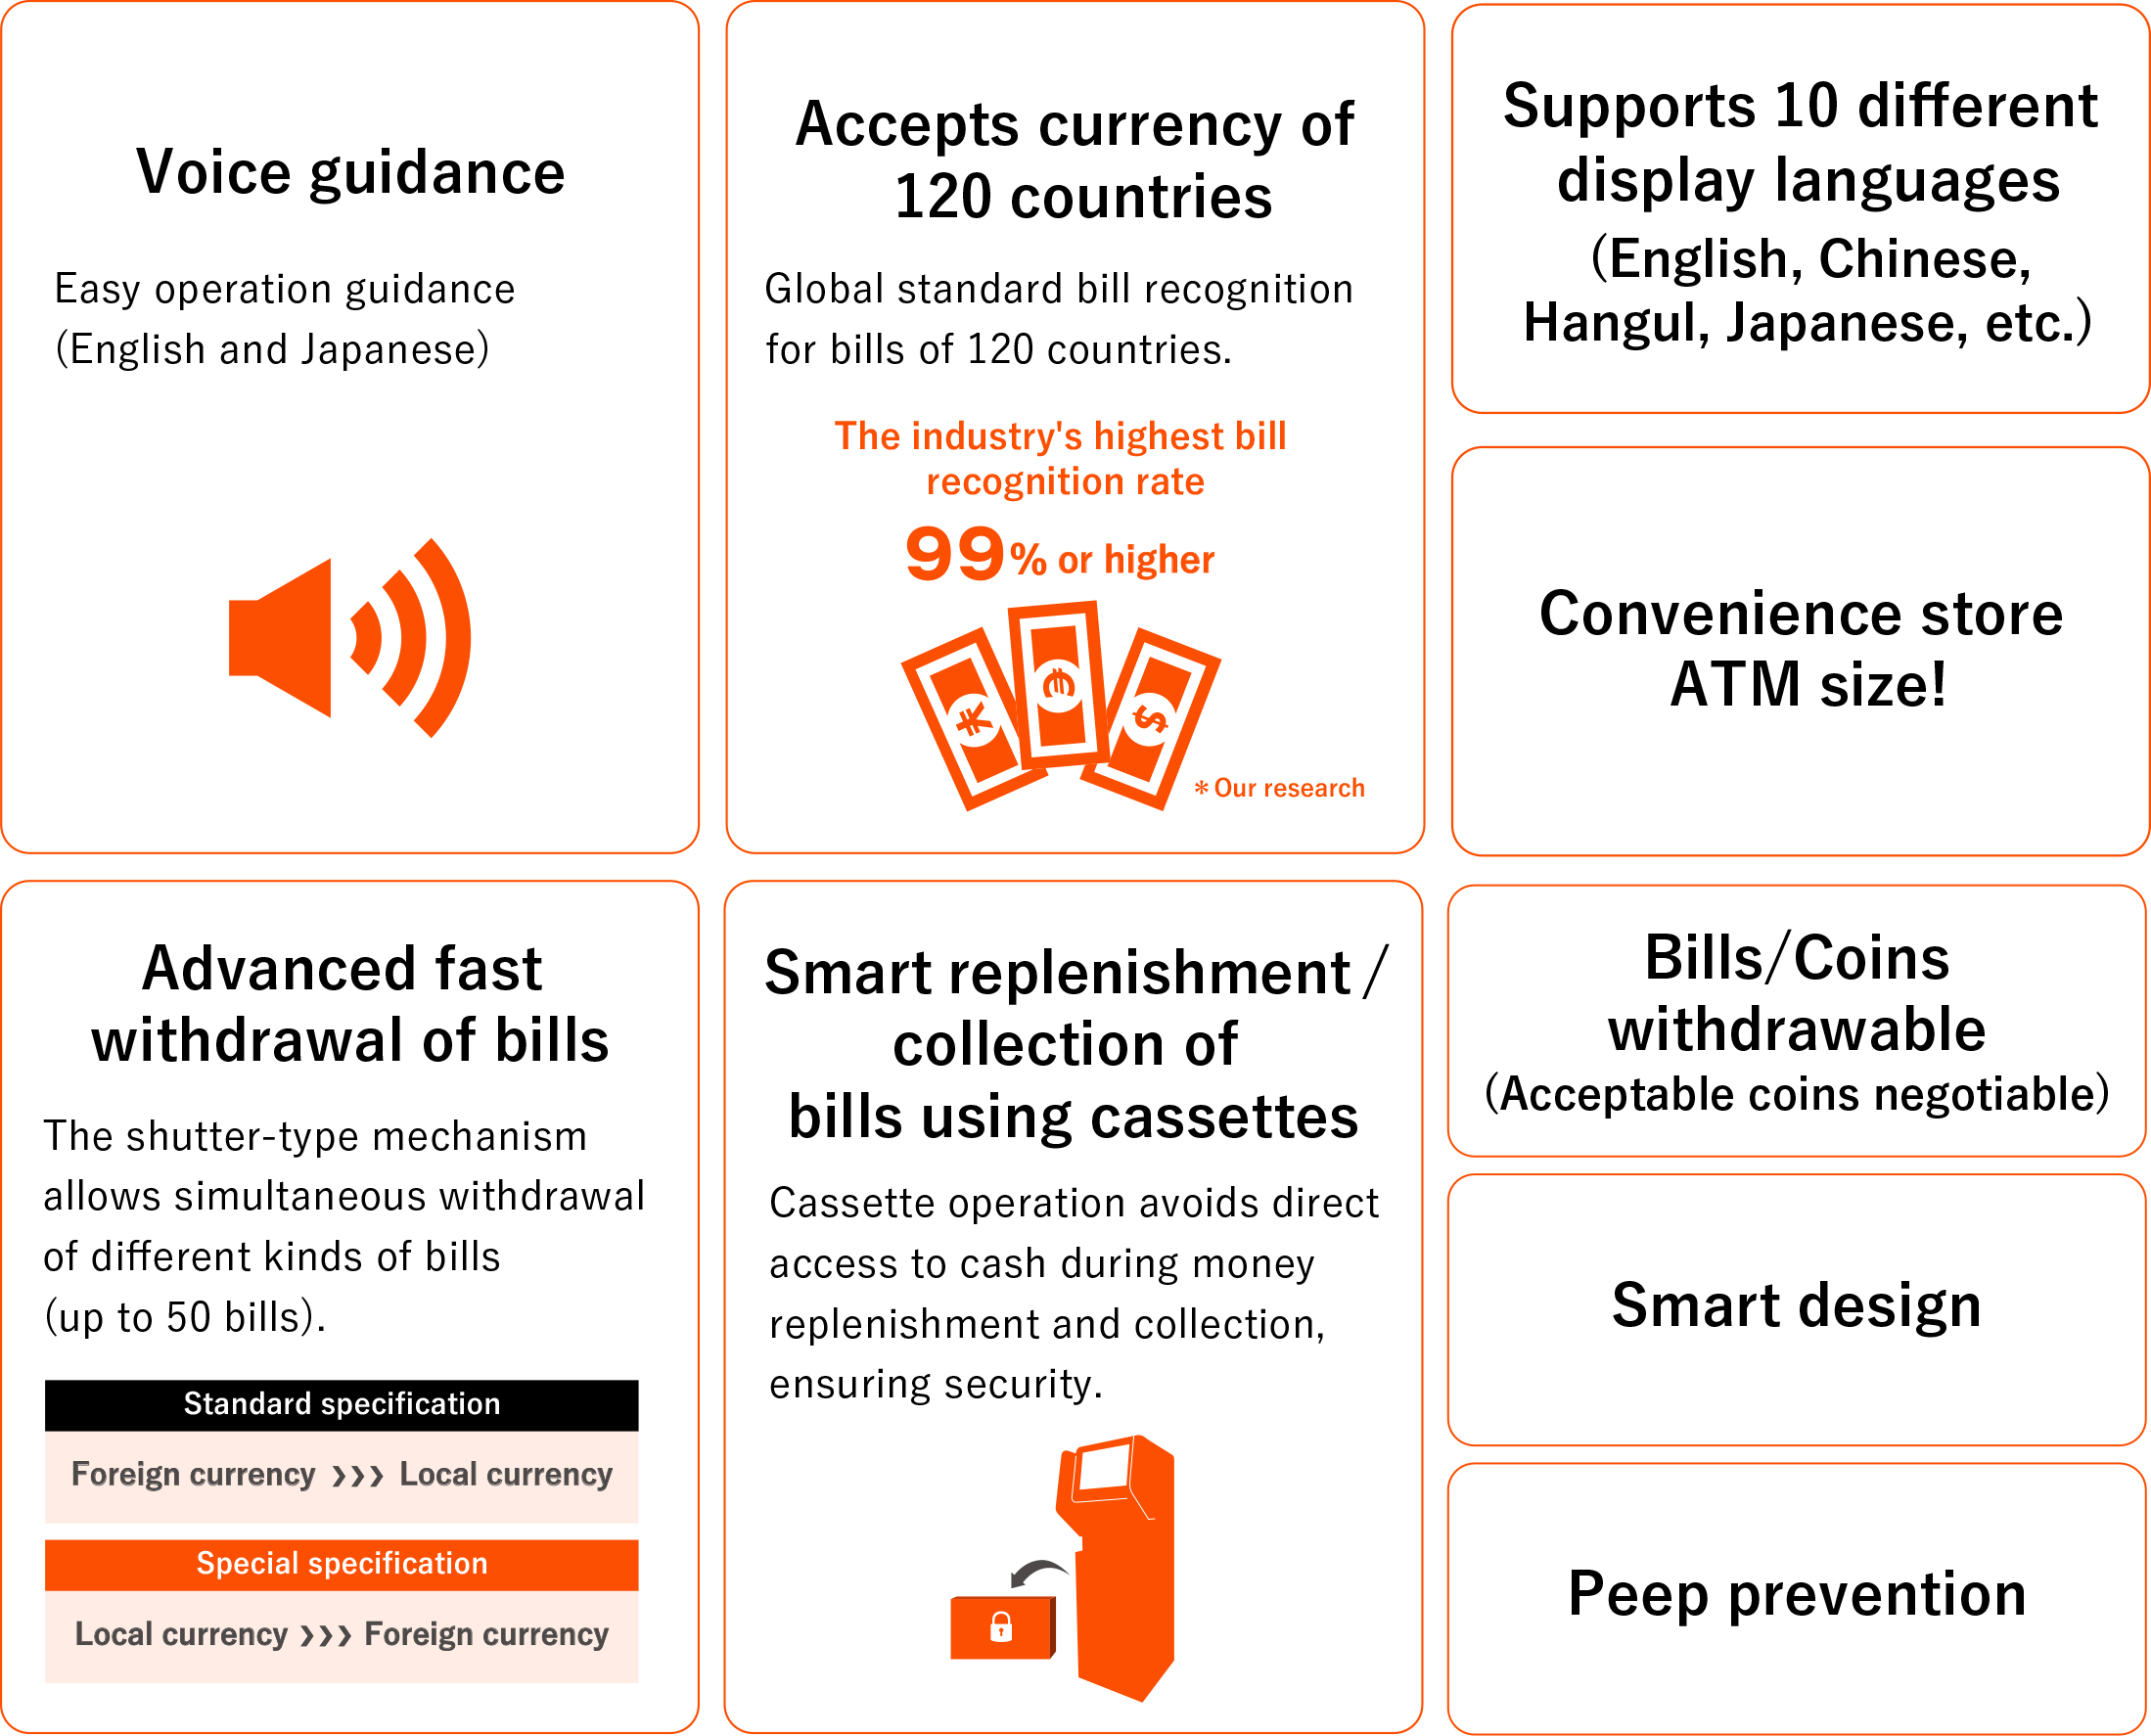 ARUNAS AES-KME Features ①Voice Guidance ②Accepts currency of 120 countries ③Displays in 10 languages ​​④Convenience store ATM size ⑤Advanced fast withdrawal of bills ⑥Cassette type safe ⑦Bills/Coins withdrawable ⑧Smart design ⑨Peep prevention